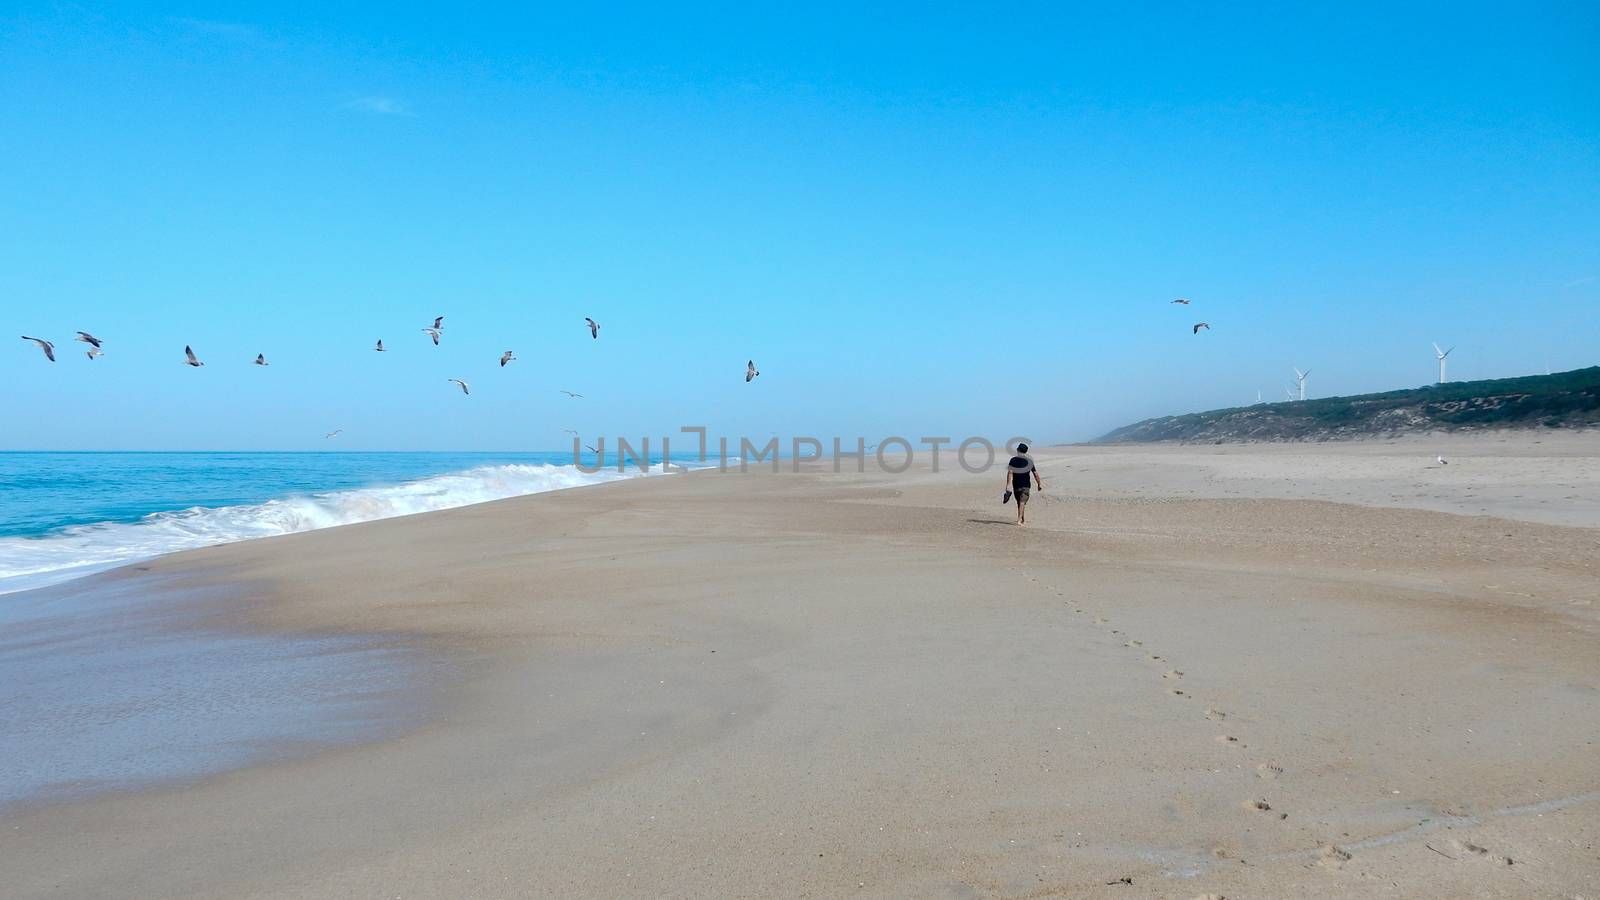 Single man solo traveller walking on rhe shore of the ocean beach with group of seagull in the blue sky - Praia do Norte Portugal